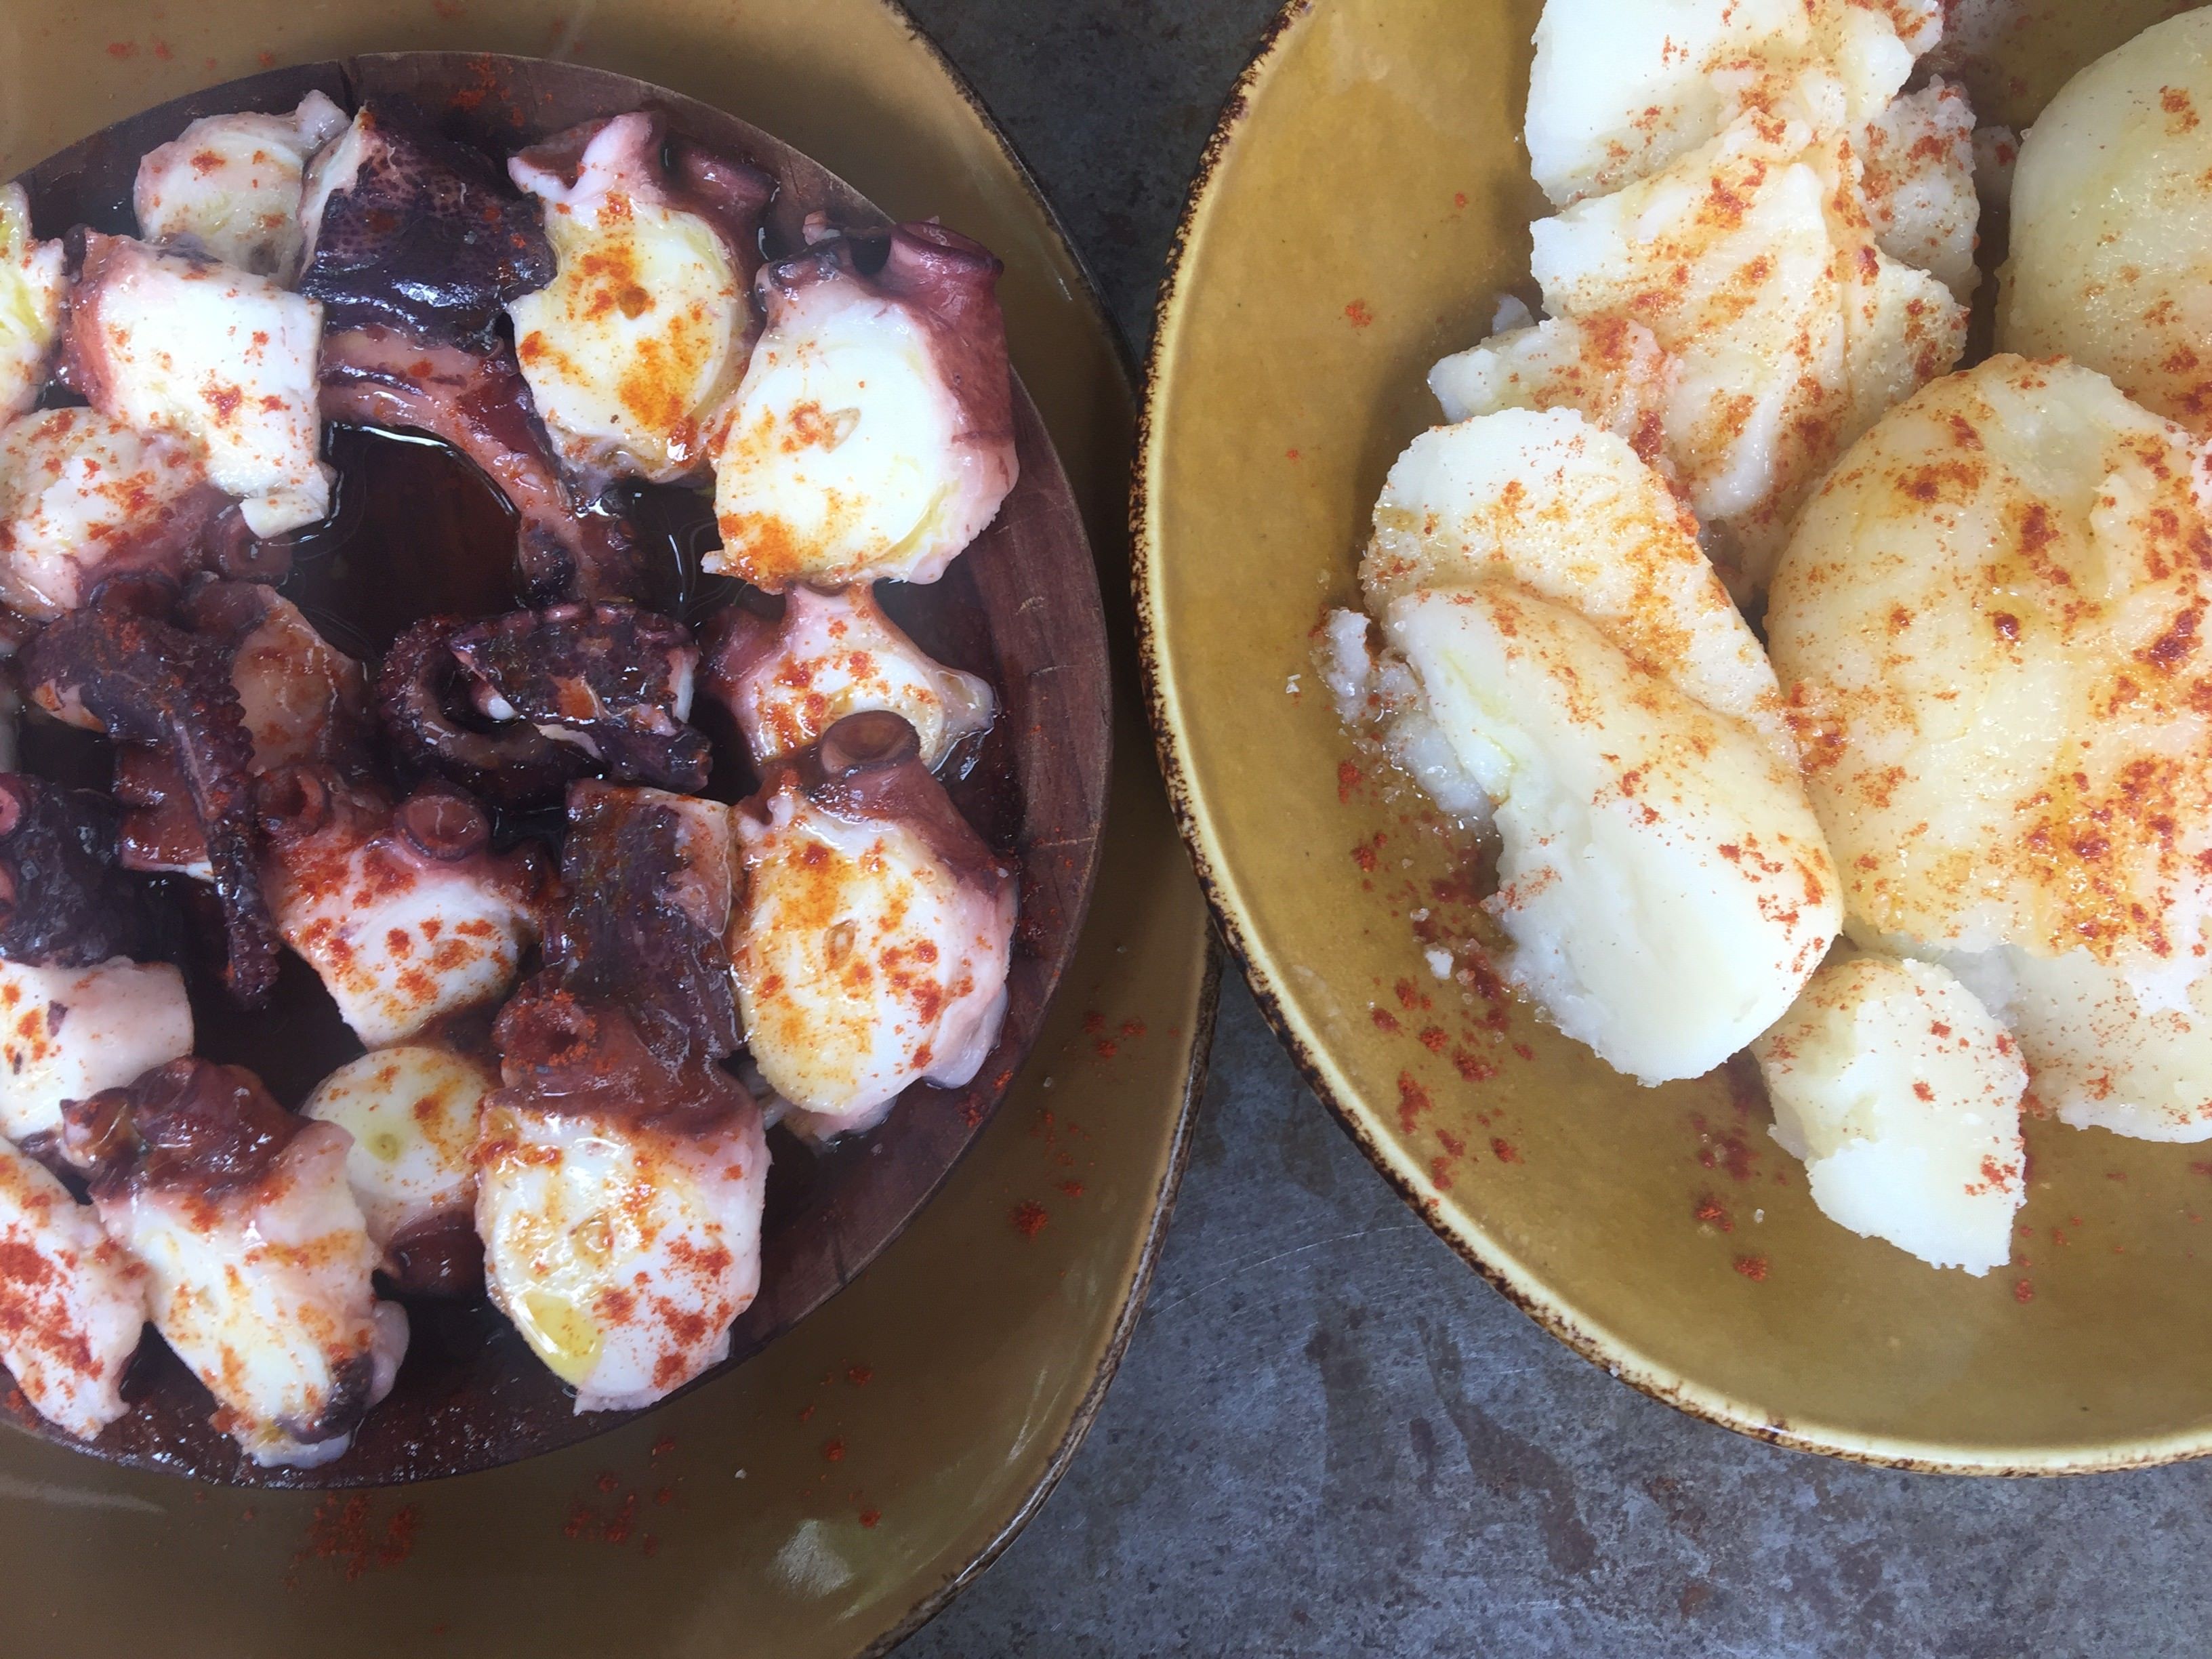 Pulpo for lunch in Coruña Spain